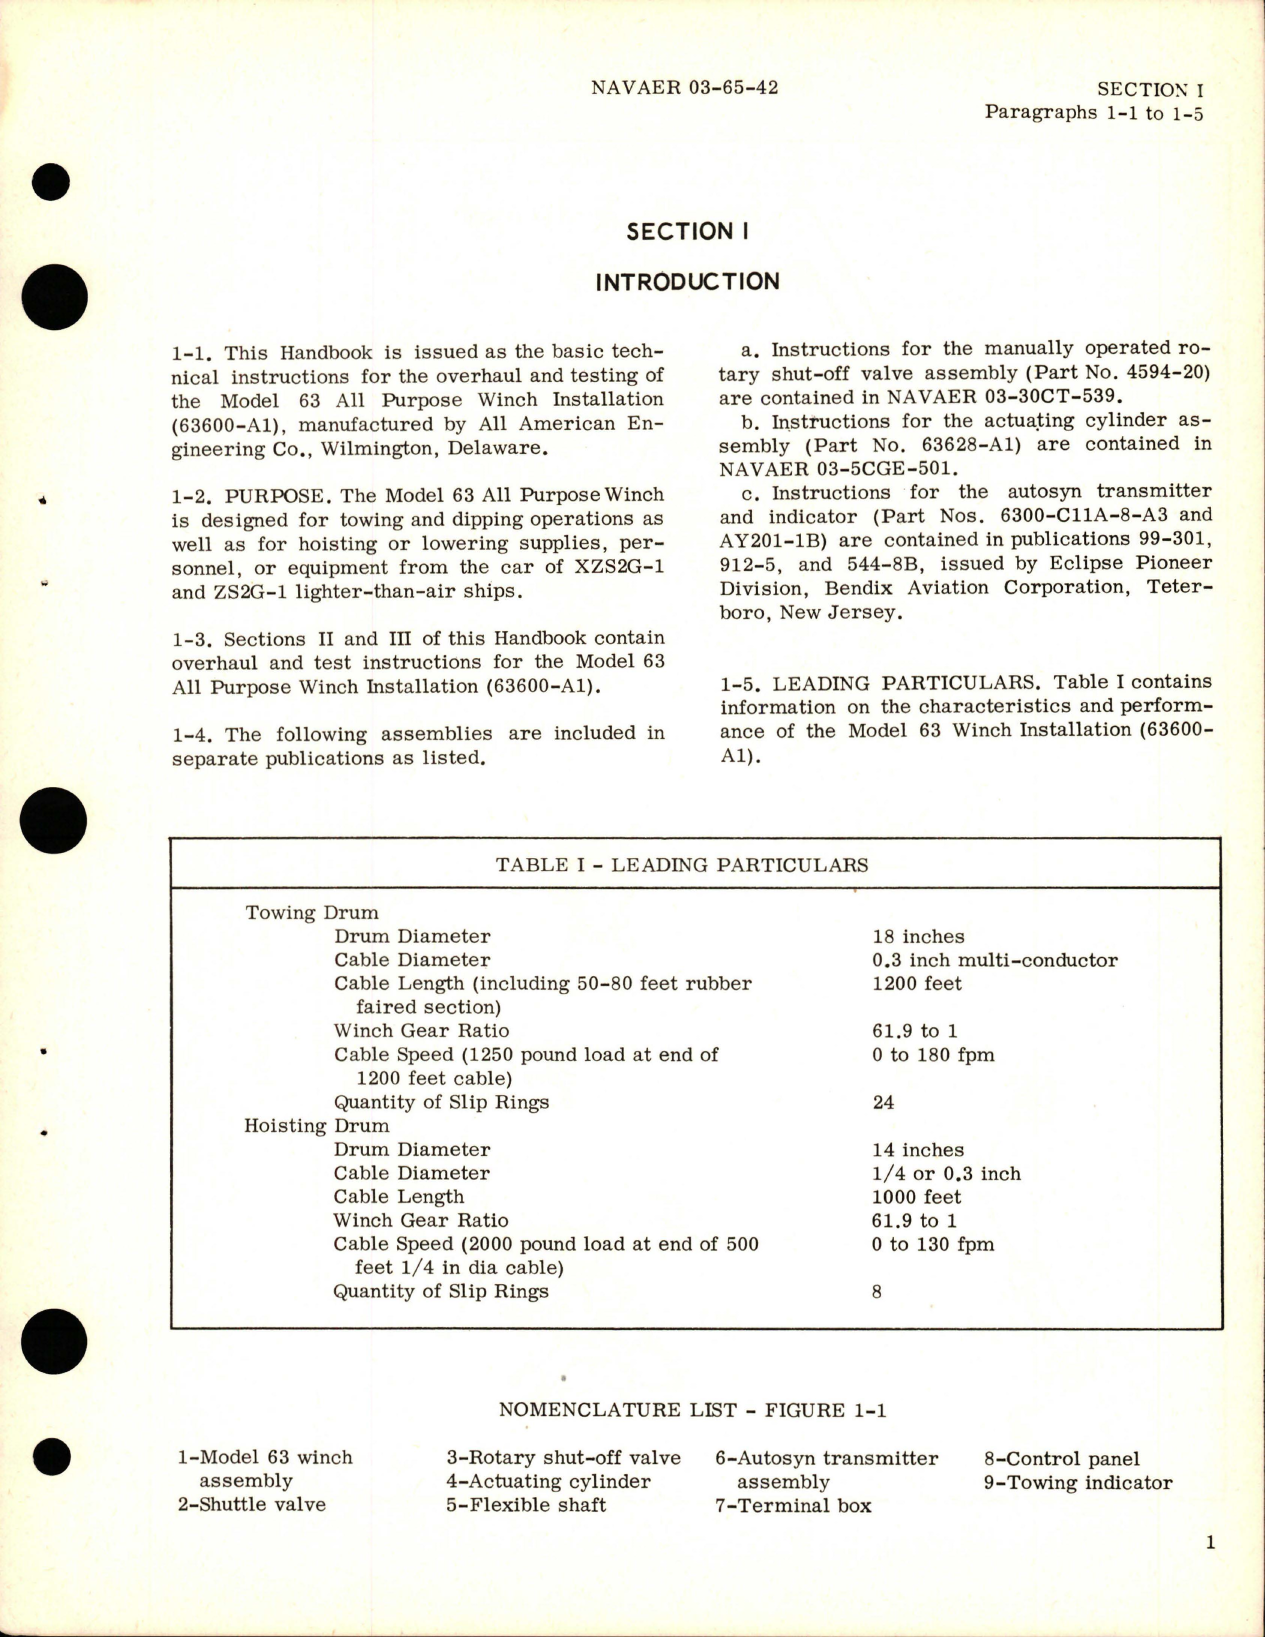 Sample page 5 from AirCorps Library document: Overhaul Instructions for All Purpose Winch - Model 63 